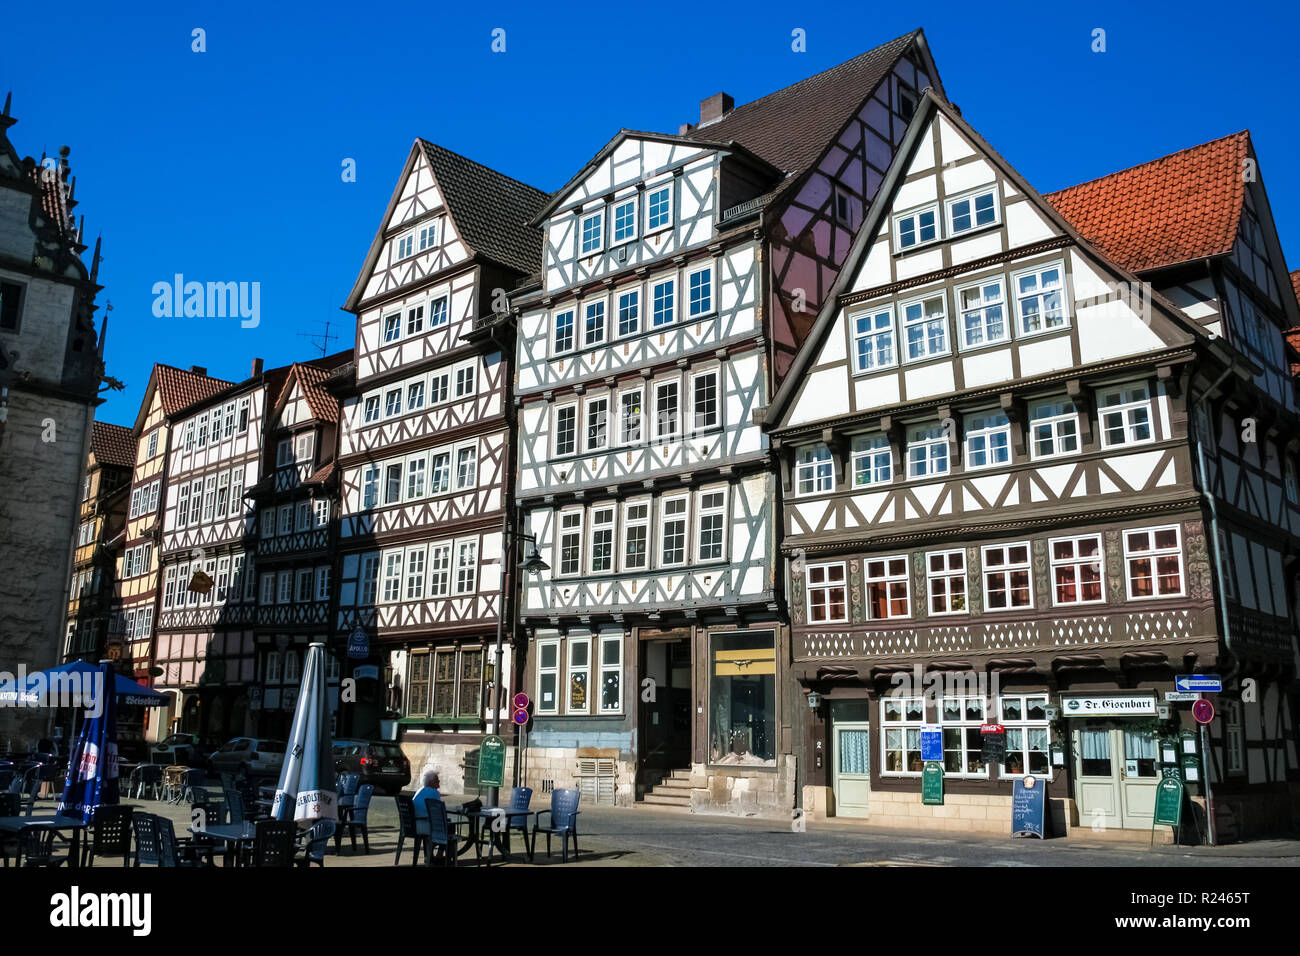 Hann. Münden, Lower Saxony/Germany - May 2008: Lovely view of traditional medieval half-timbered houses at the marketplace. The structural frame of... Stock Photo